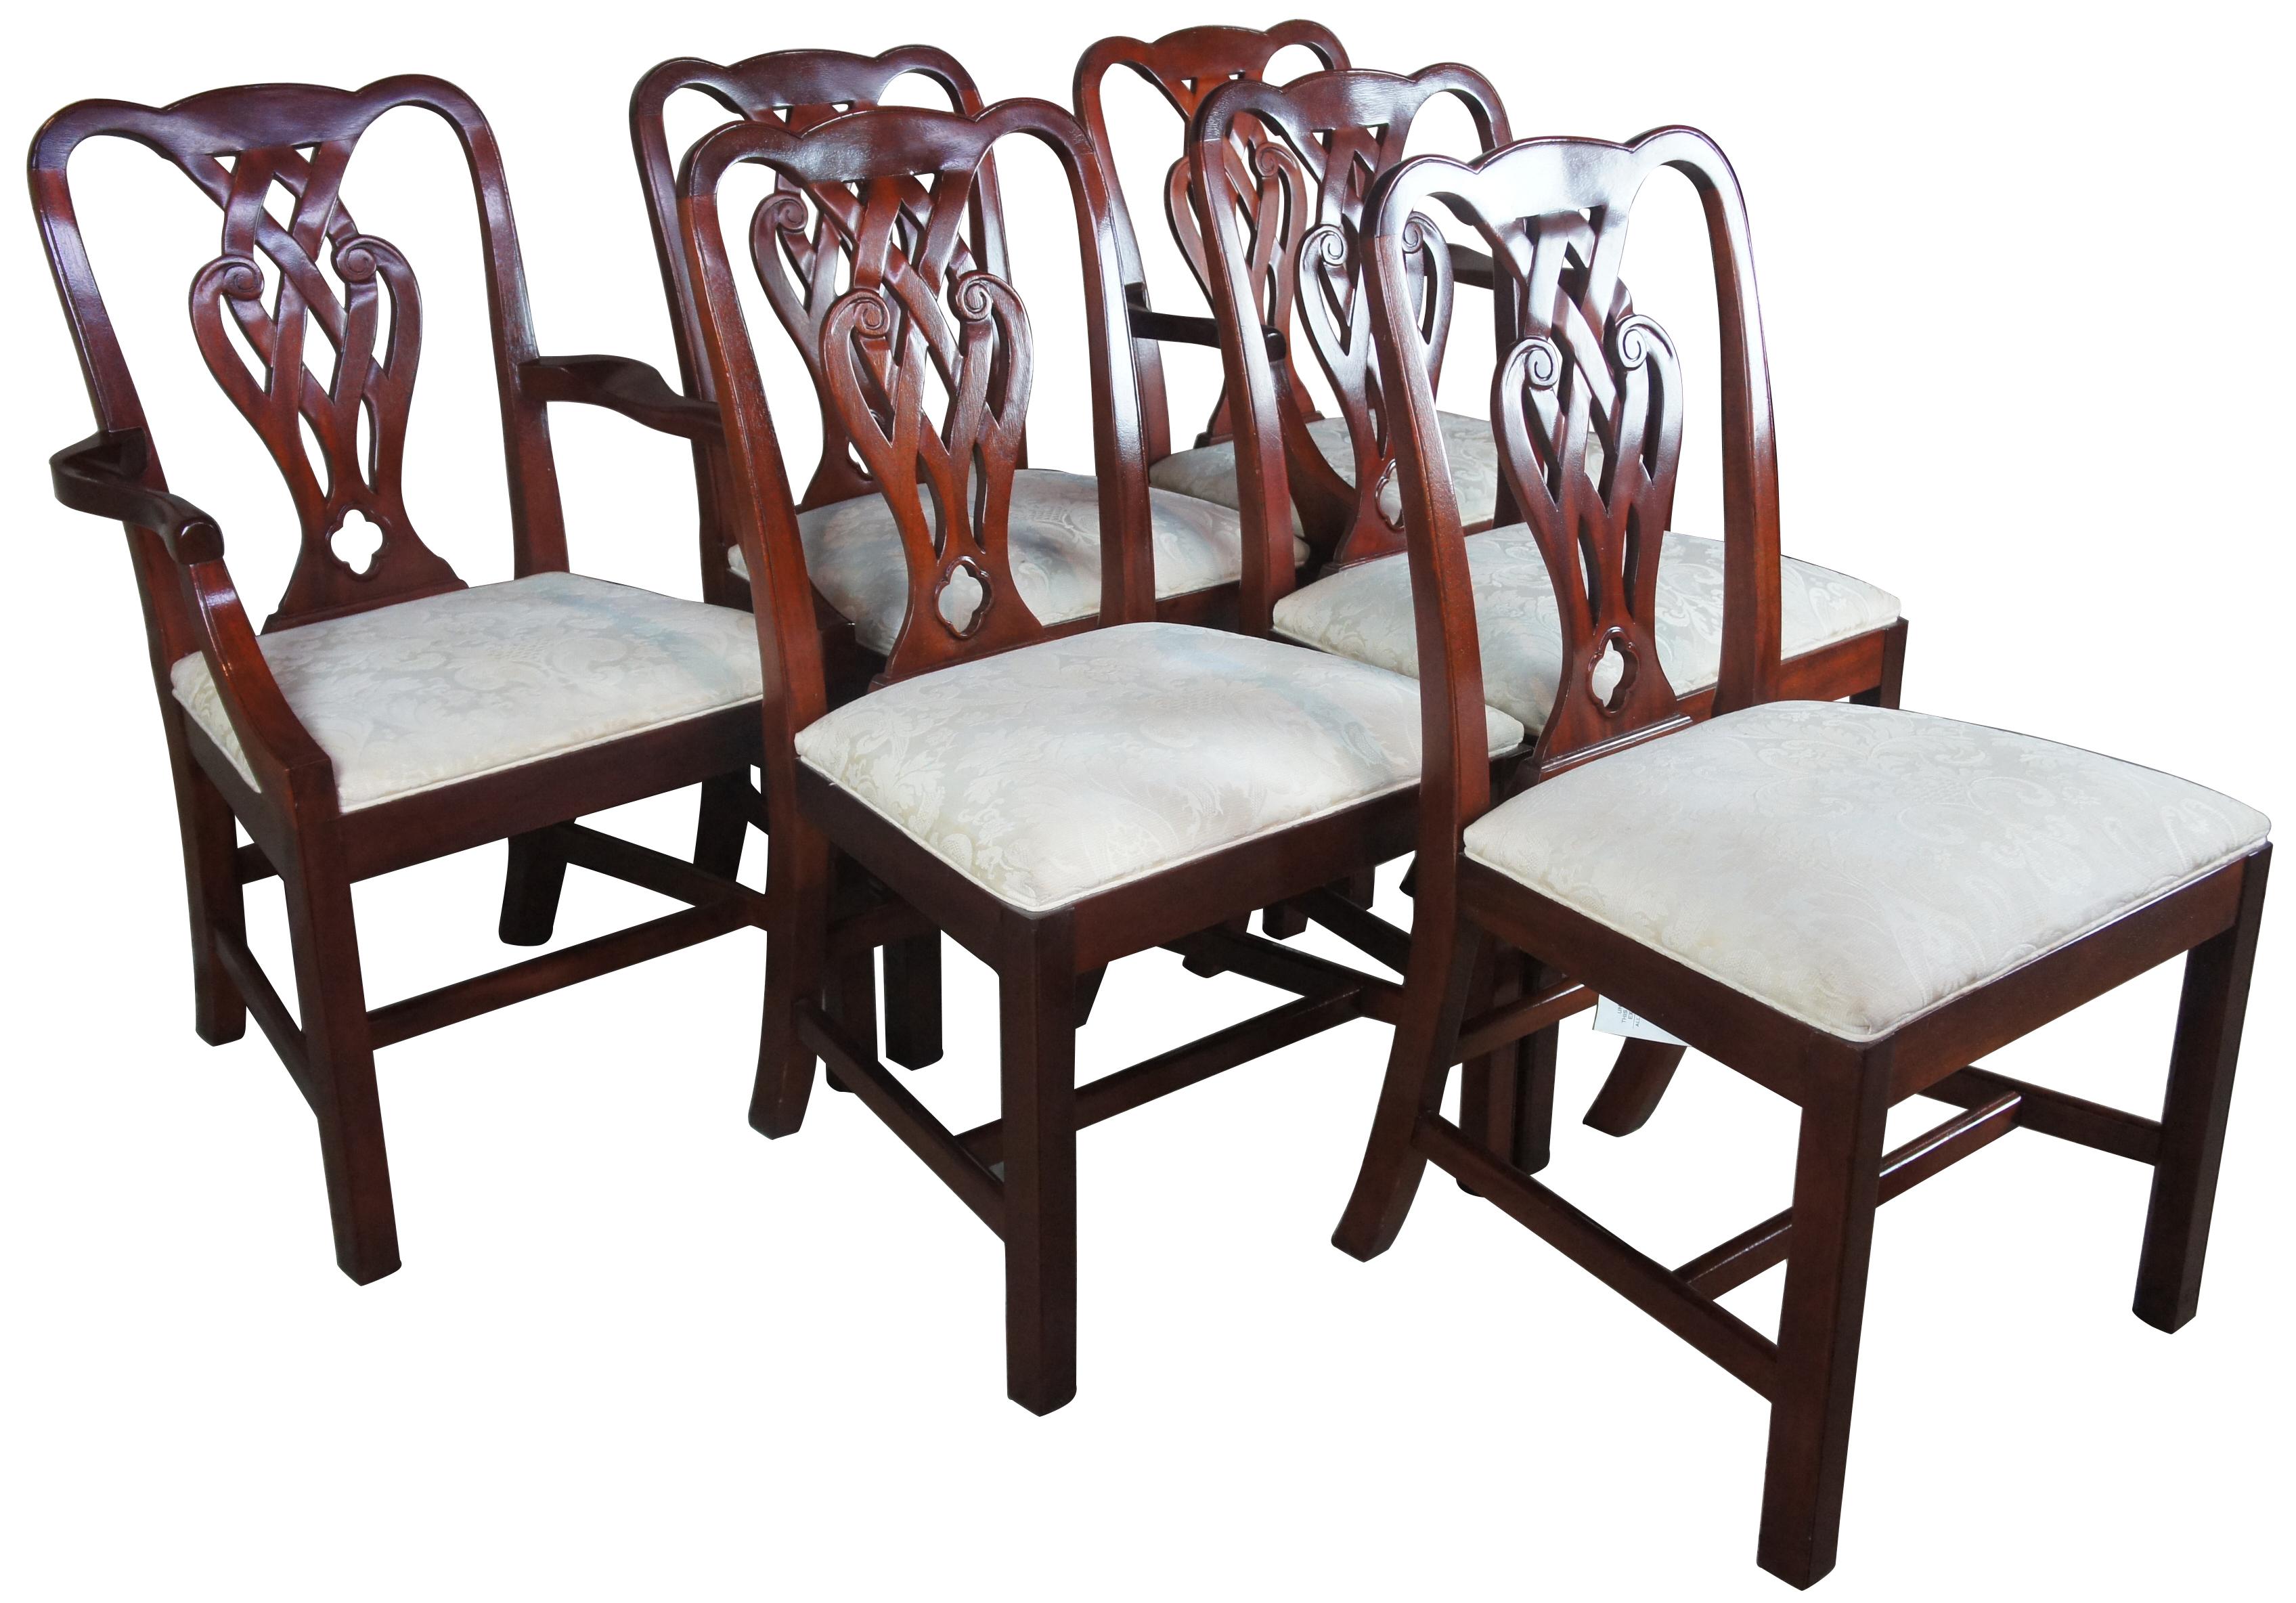 6 vintage baker Chippendale style pretzel back mahogany dining chairs

Baker dining chairs, circa 1980s. Made from mahogany with an interwoven pierced and carved back. Features a brocade upholstered white seat.